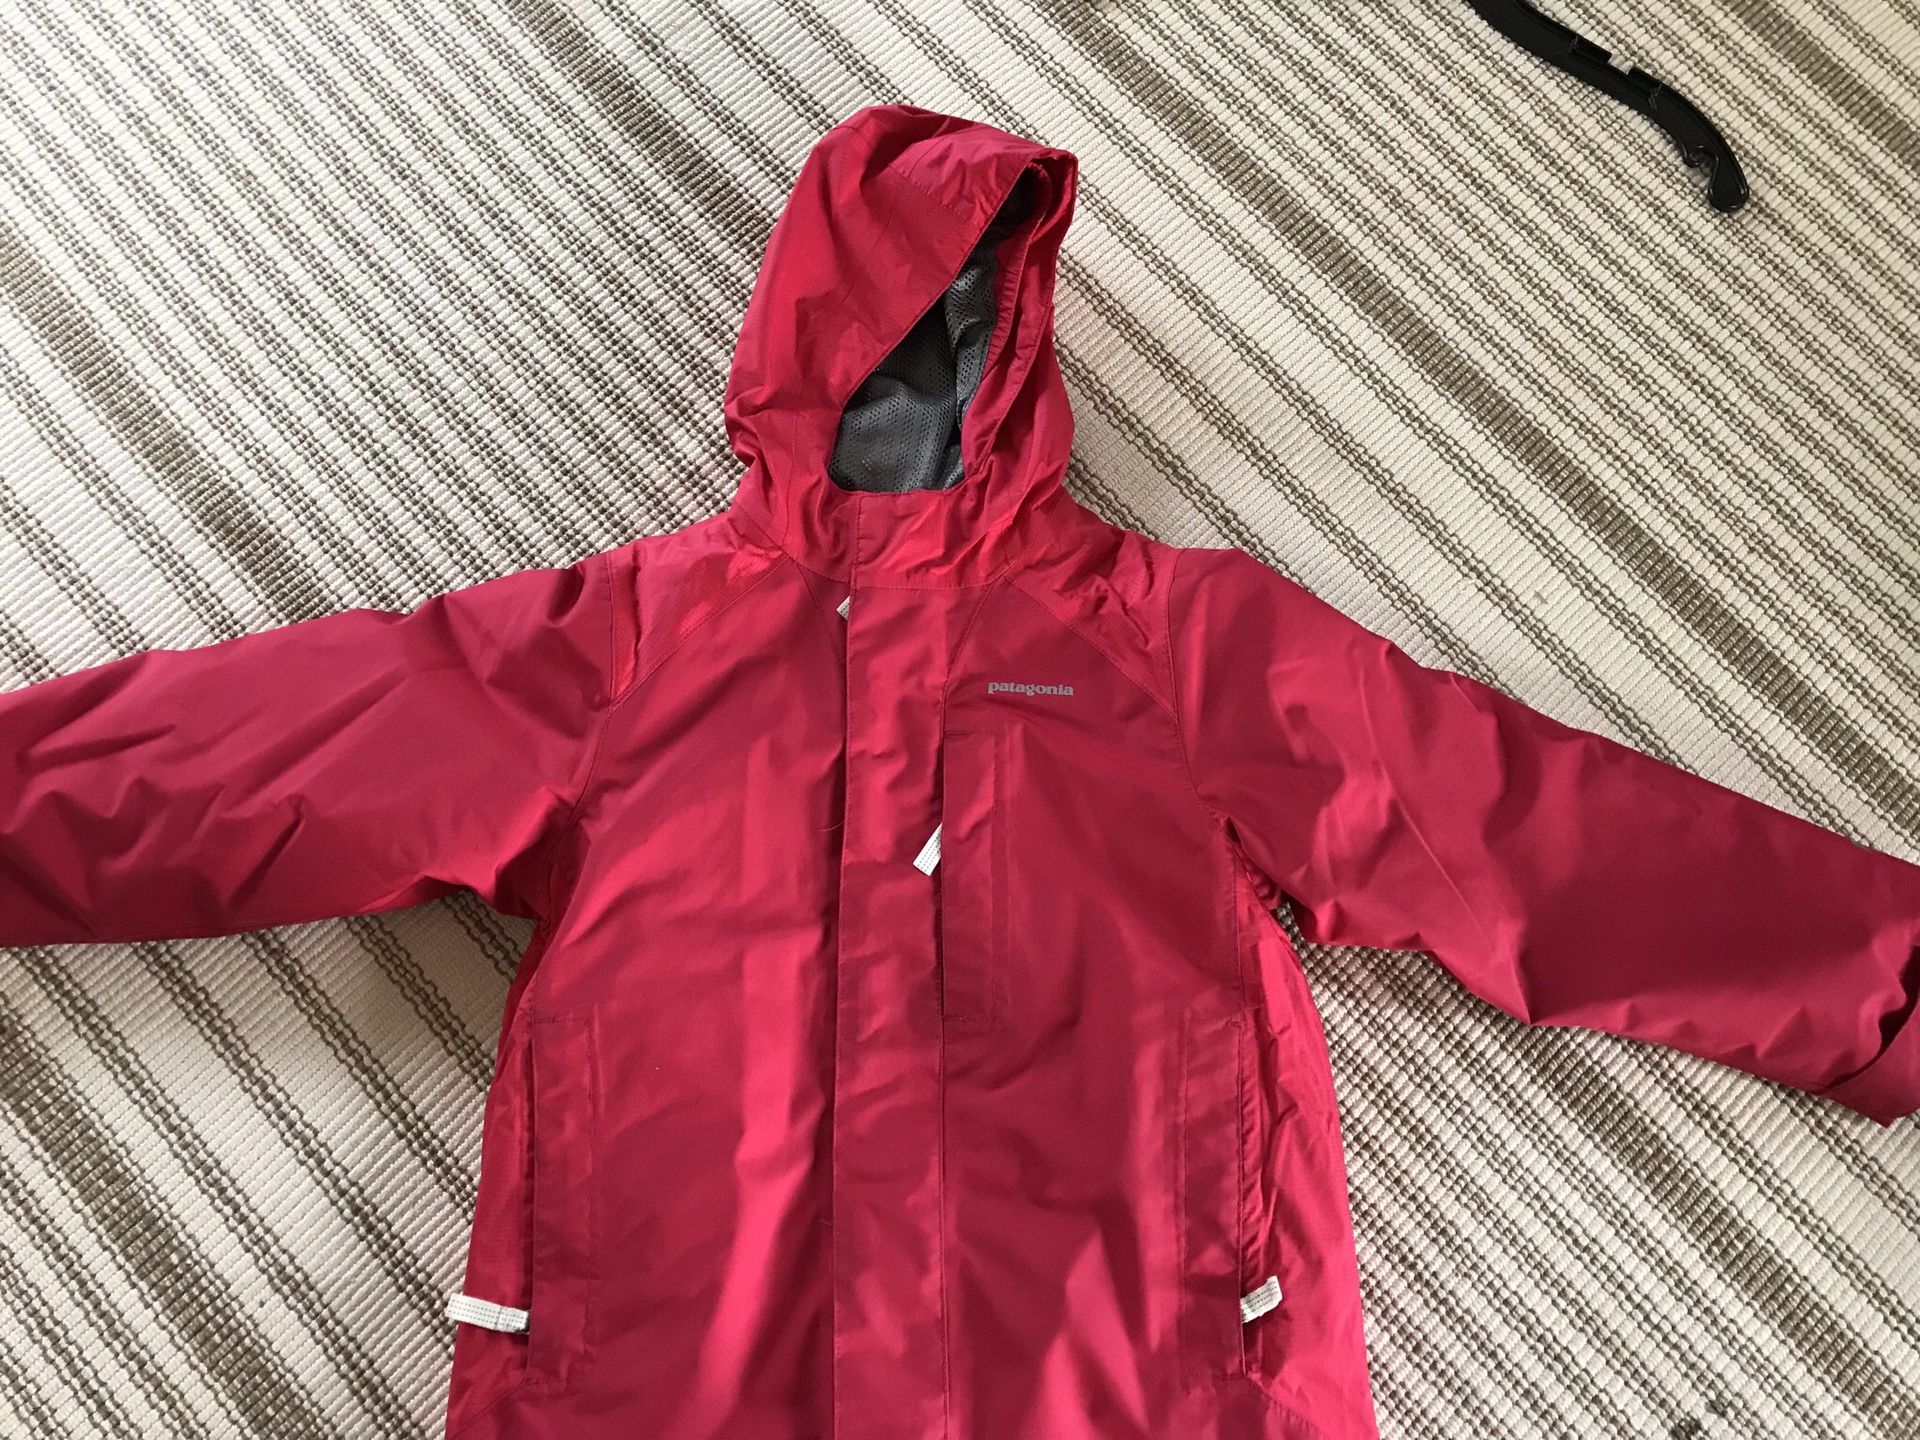 Patagonia kids 3 in 1 parka size S (8)